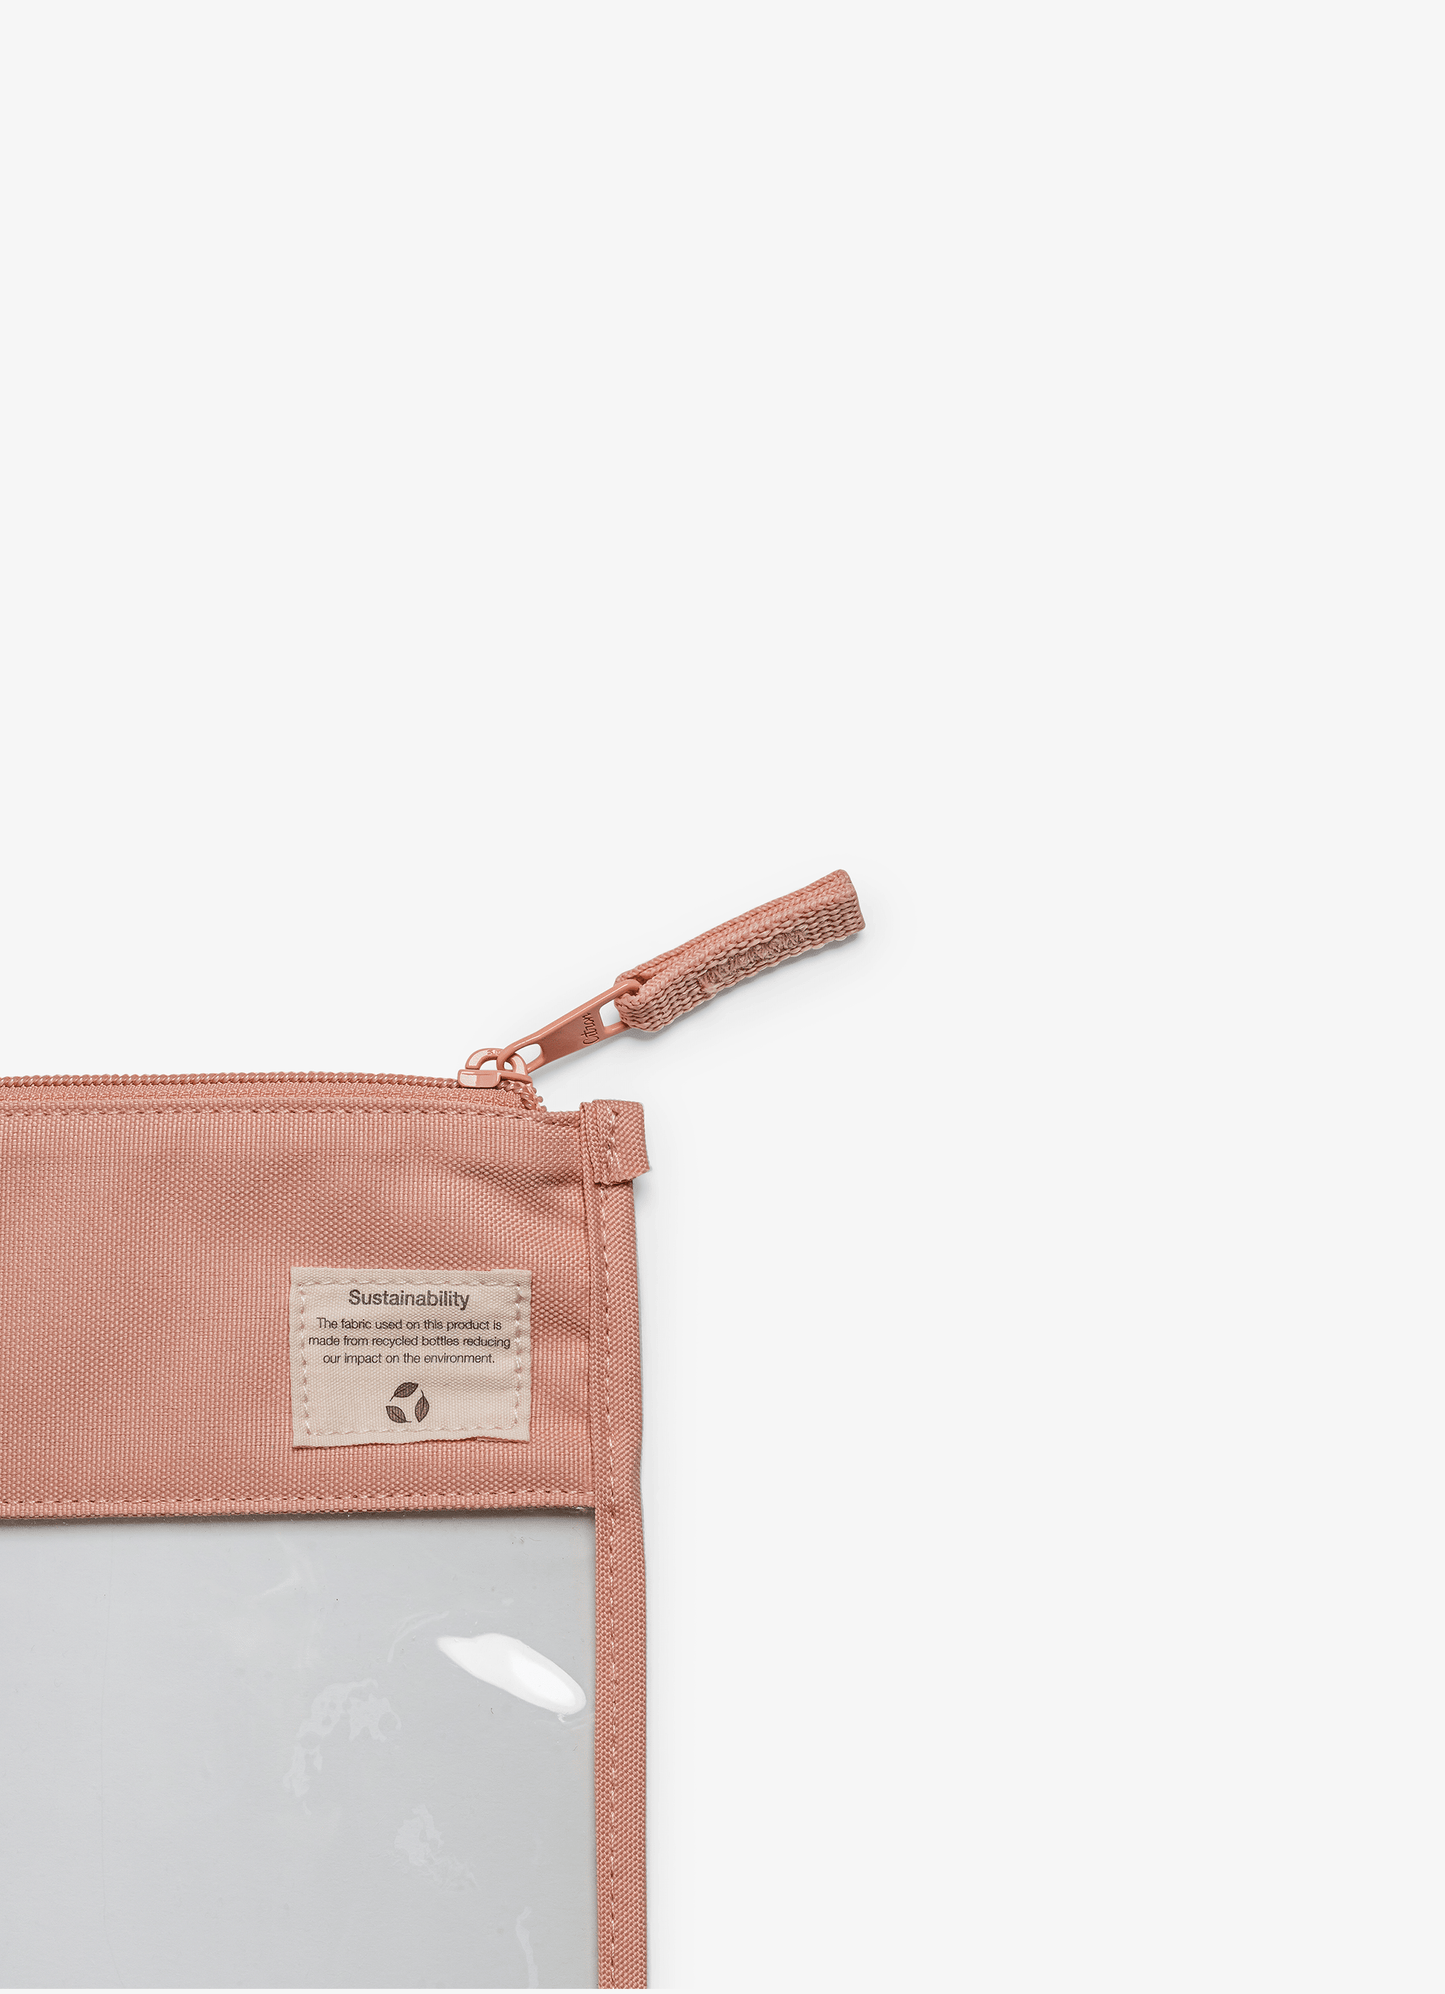 Clear Zipper Pouch - Small - Blush Pink